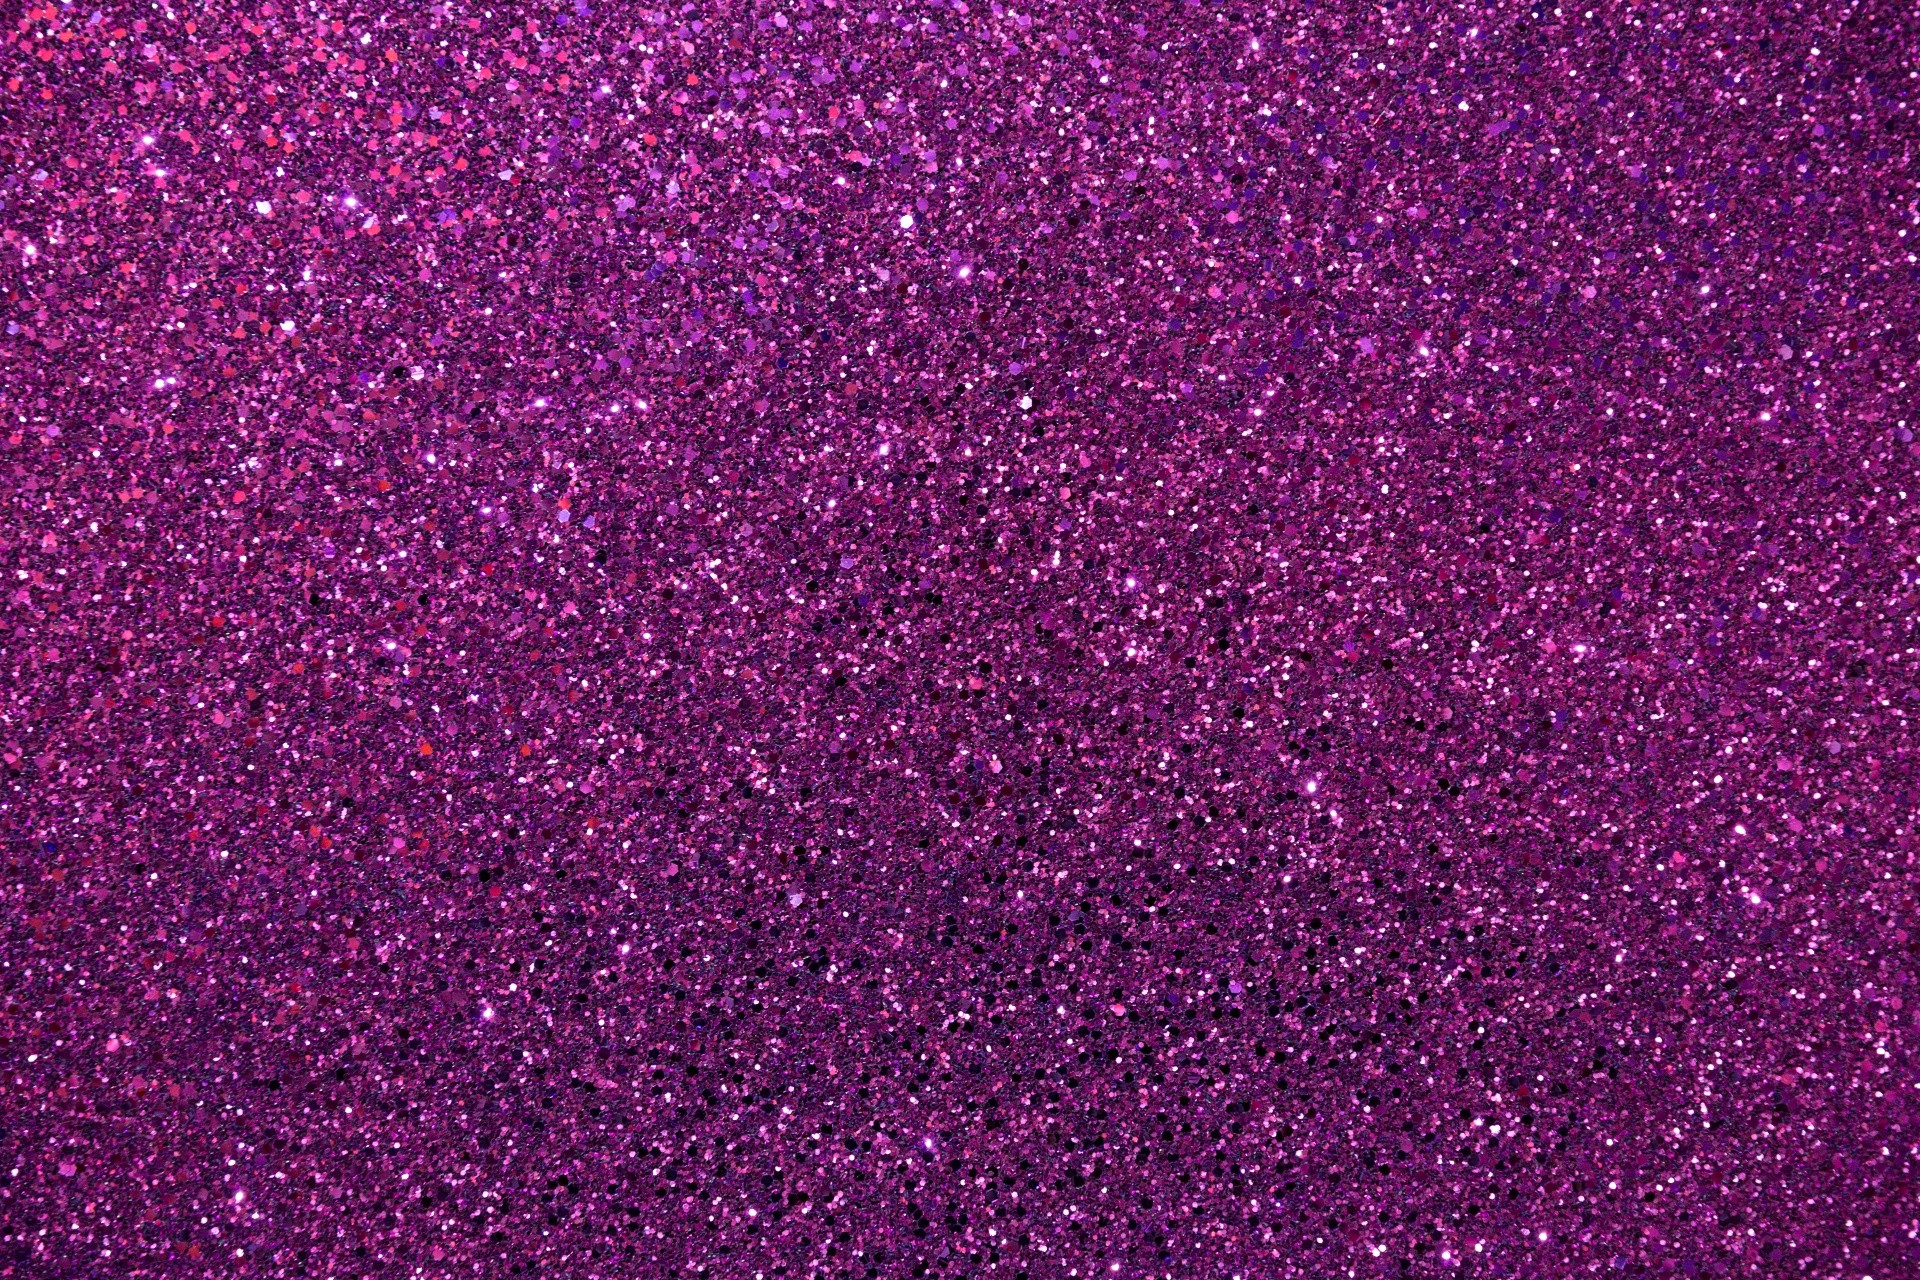 Purple Glitter background ·① Download free beautiful wallpapers for ...